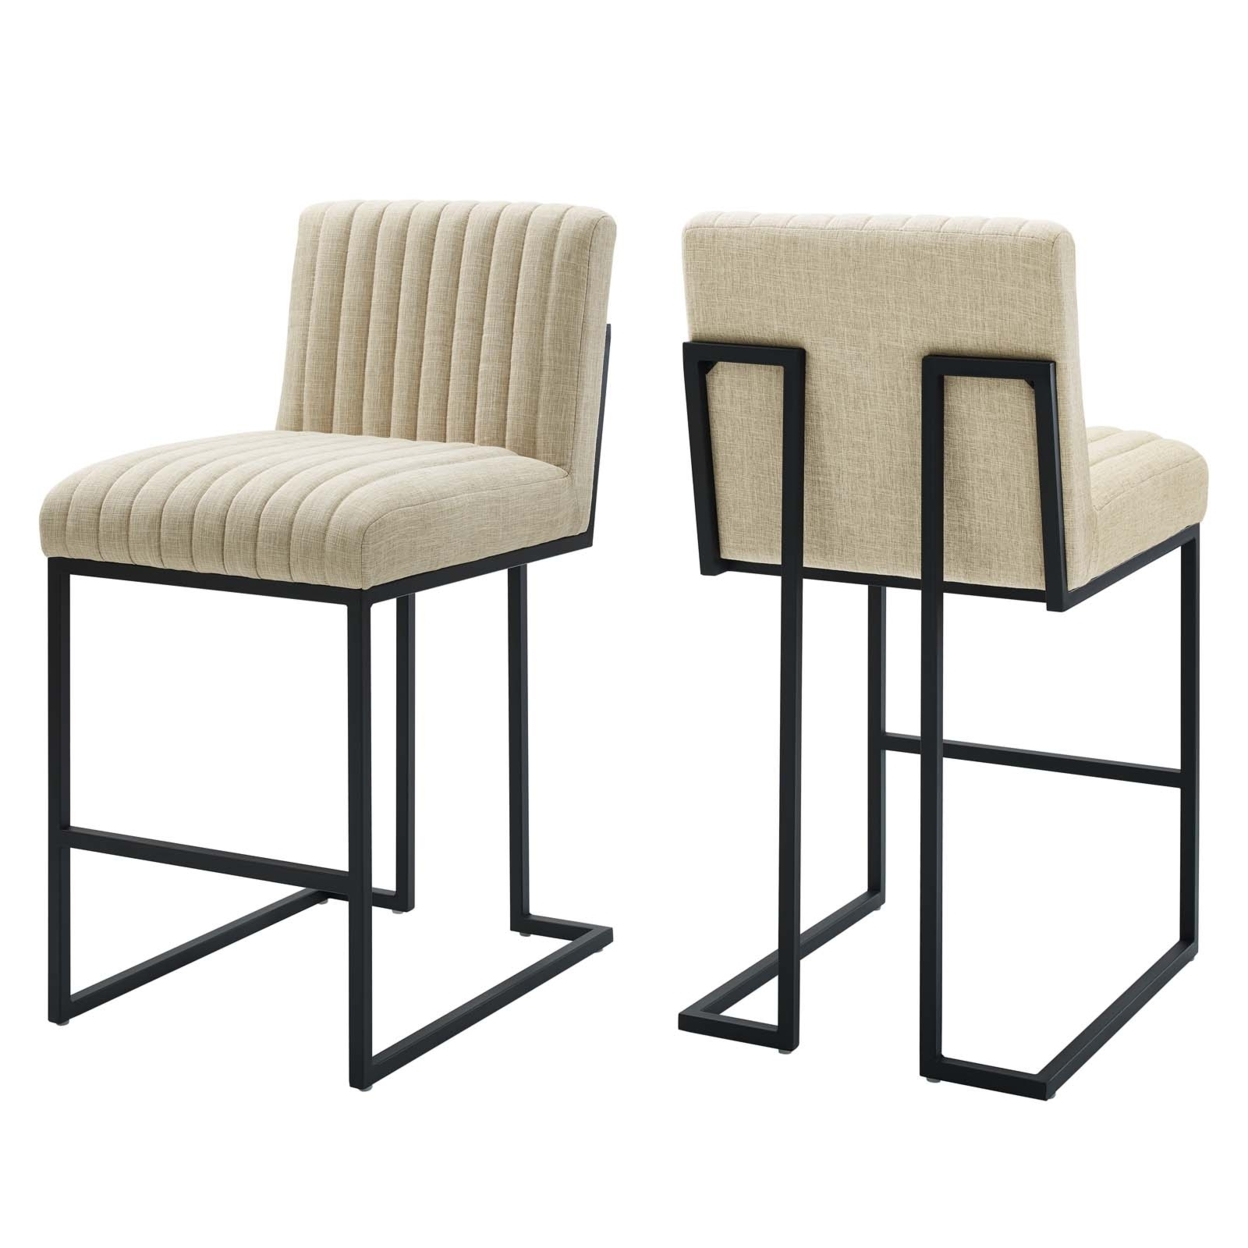 Indulge Channel Tufted Fabric Counter Stools - Set Of 2, Beige